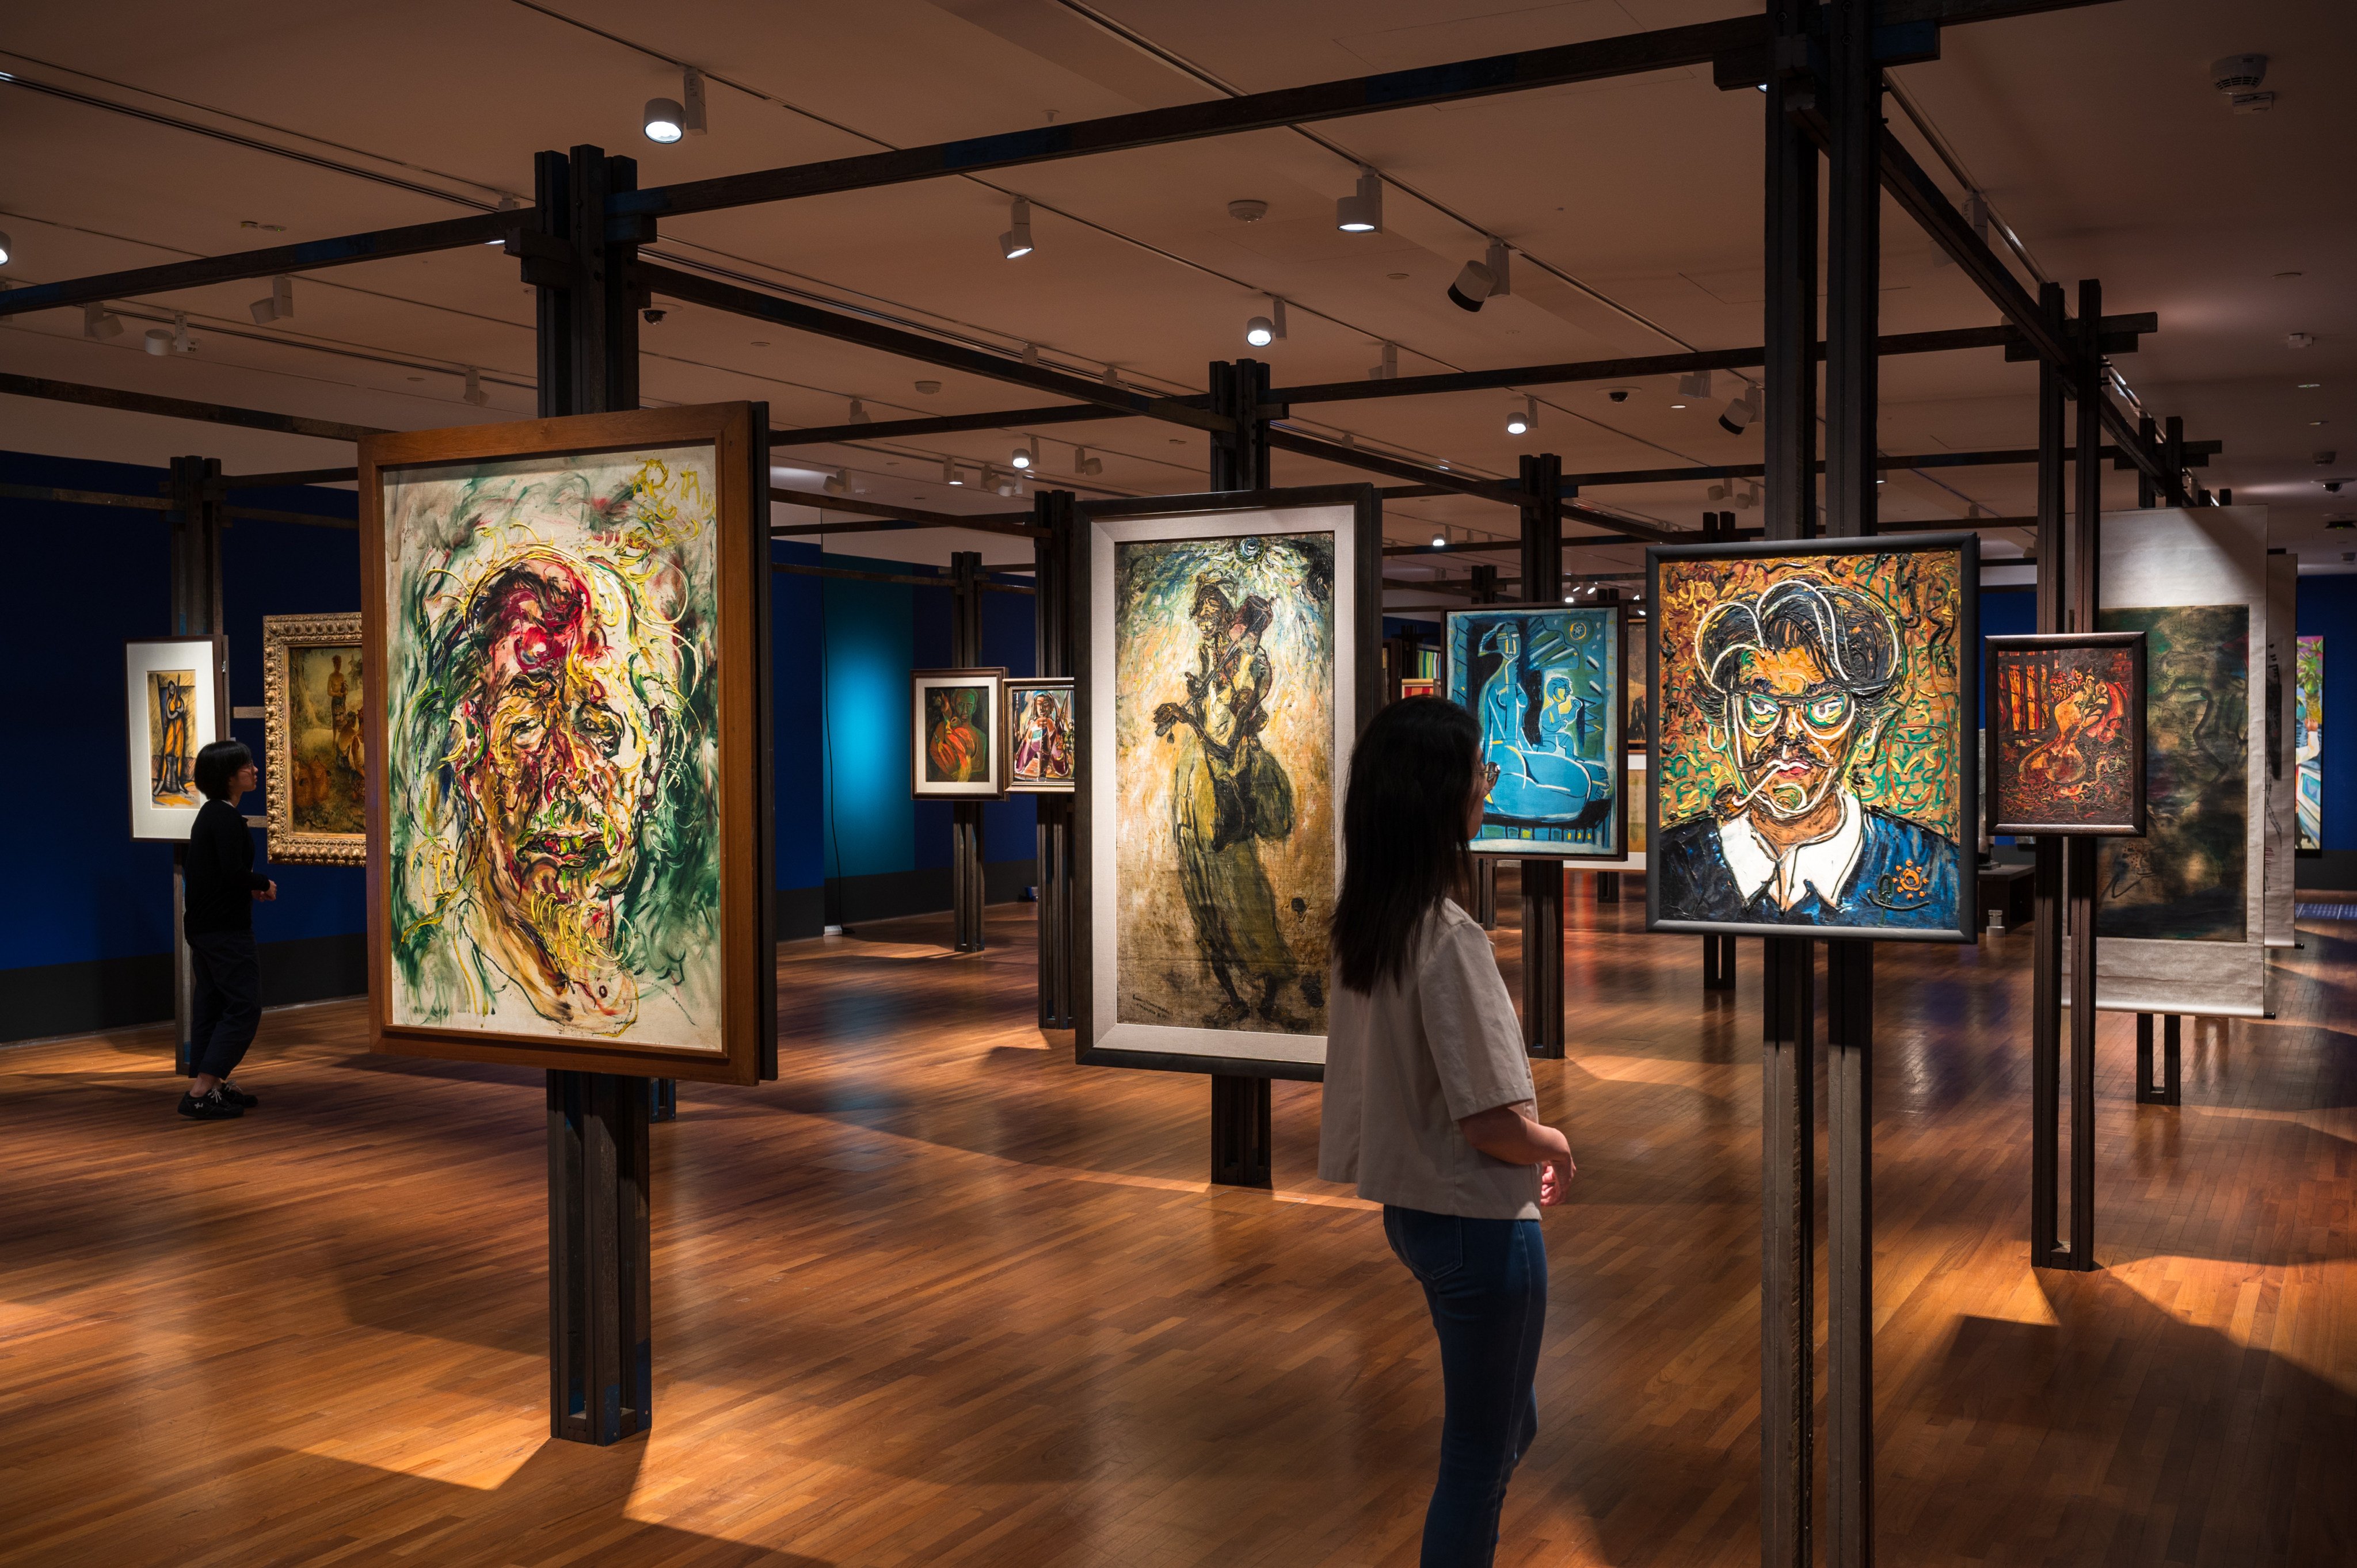 A visitor looks at paintings at the National Gallery Singapore’s “Tropical” exhibition, which explores colonial and postcolonial experiences in Southeast Asia and Latin America and features artists including Paul Gaugain, Frida Kahlo and David Medalla. Photo: National Gallery Singapore